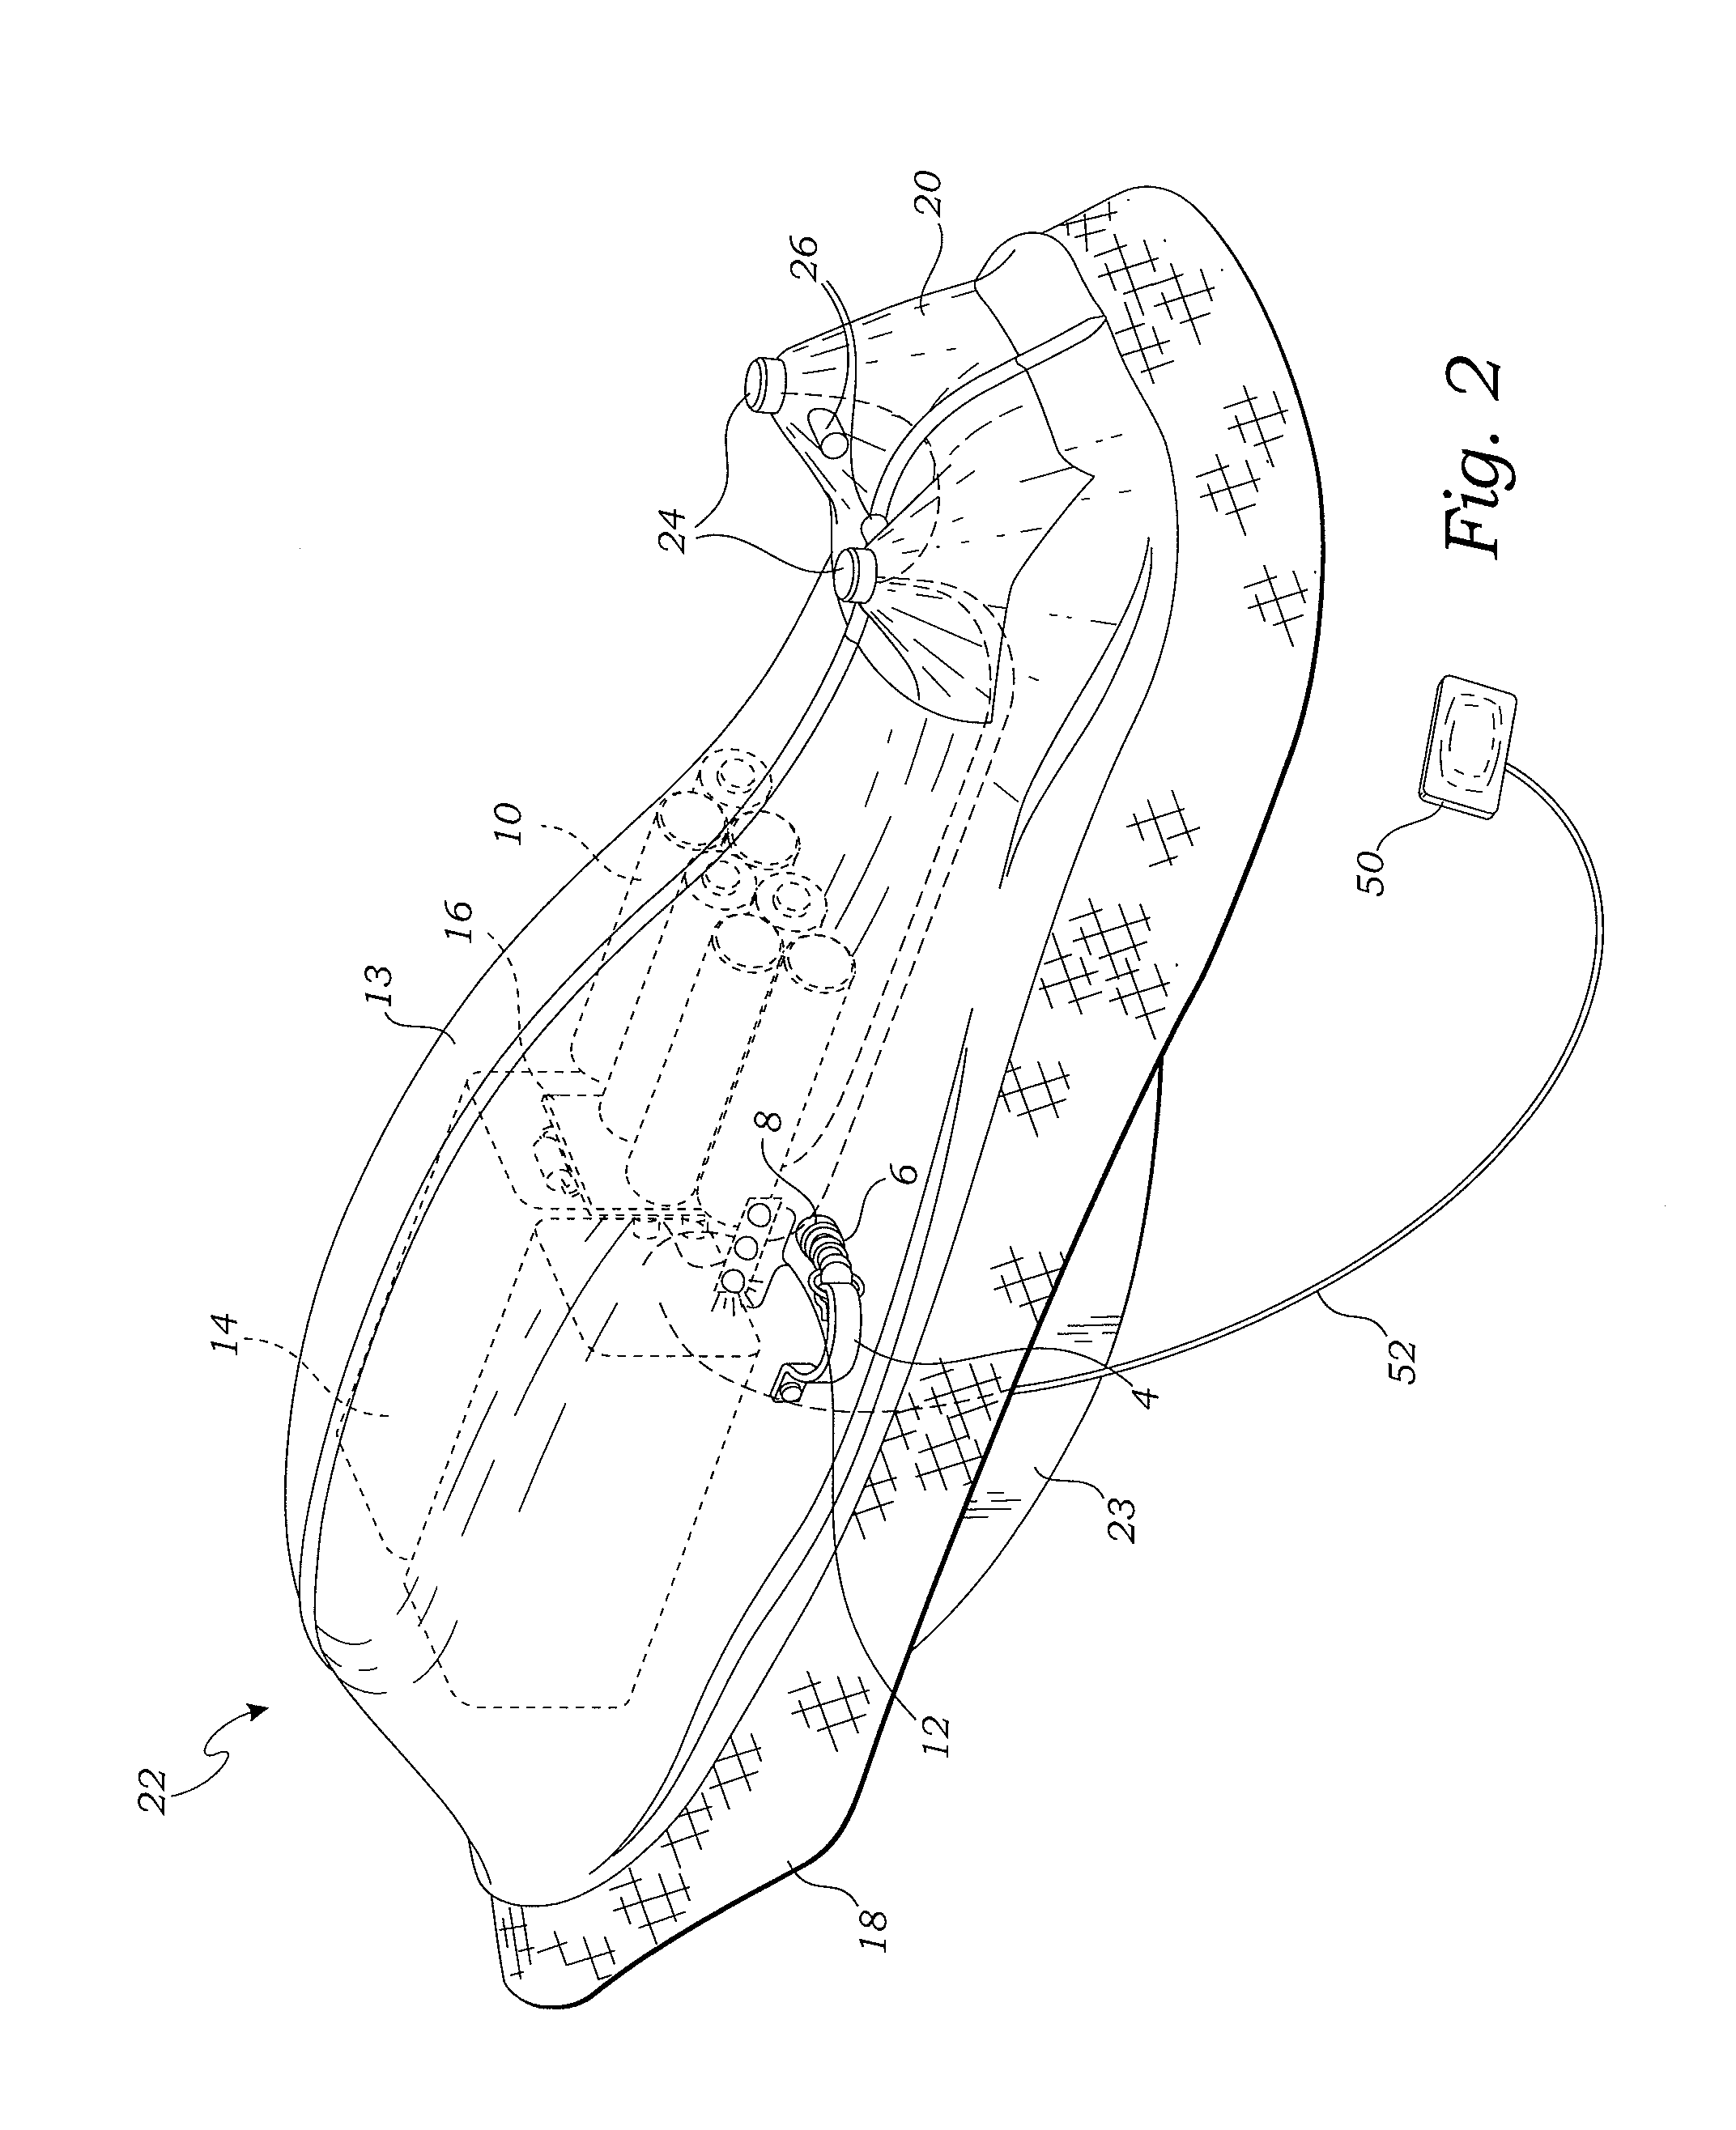 Wearable shield and self-defense device including multiple integrated components